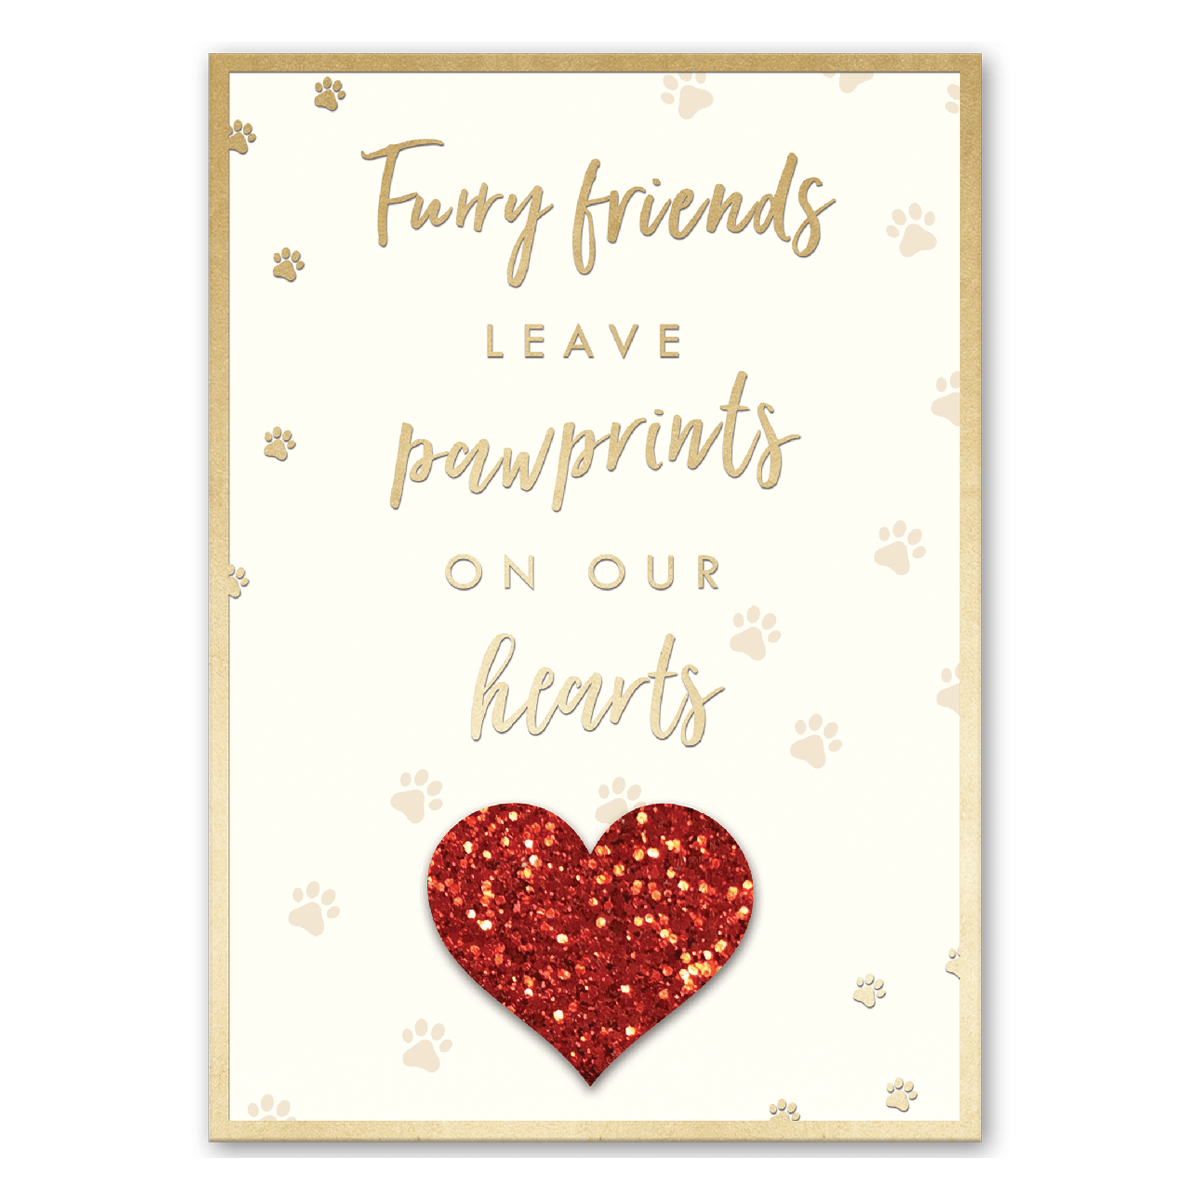 Pawprints On Our Hearts Greeting Card